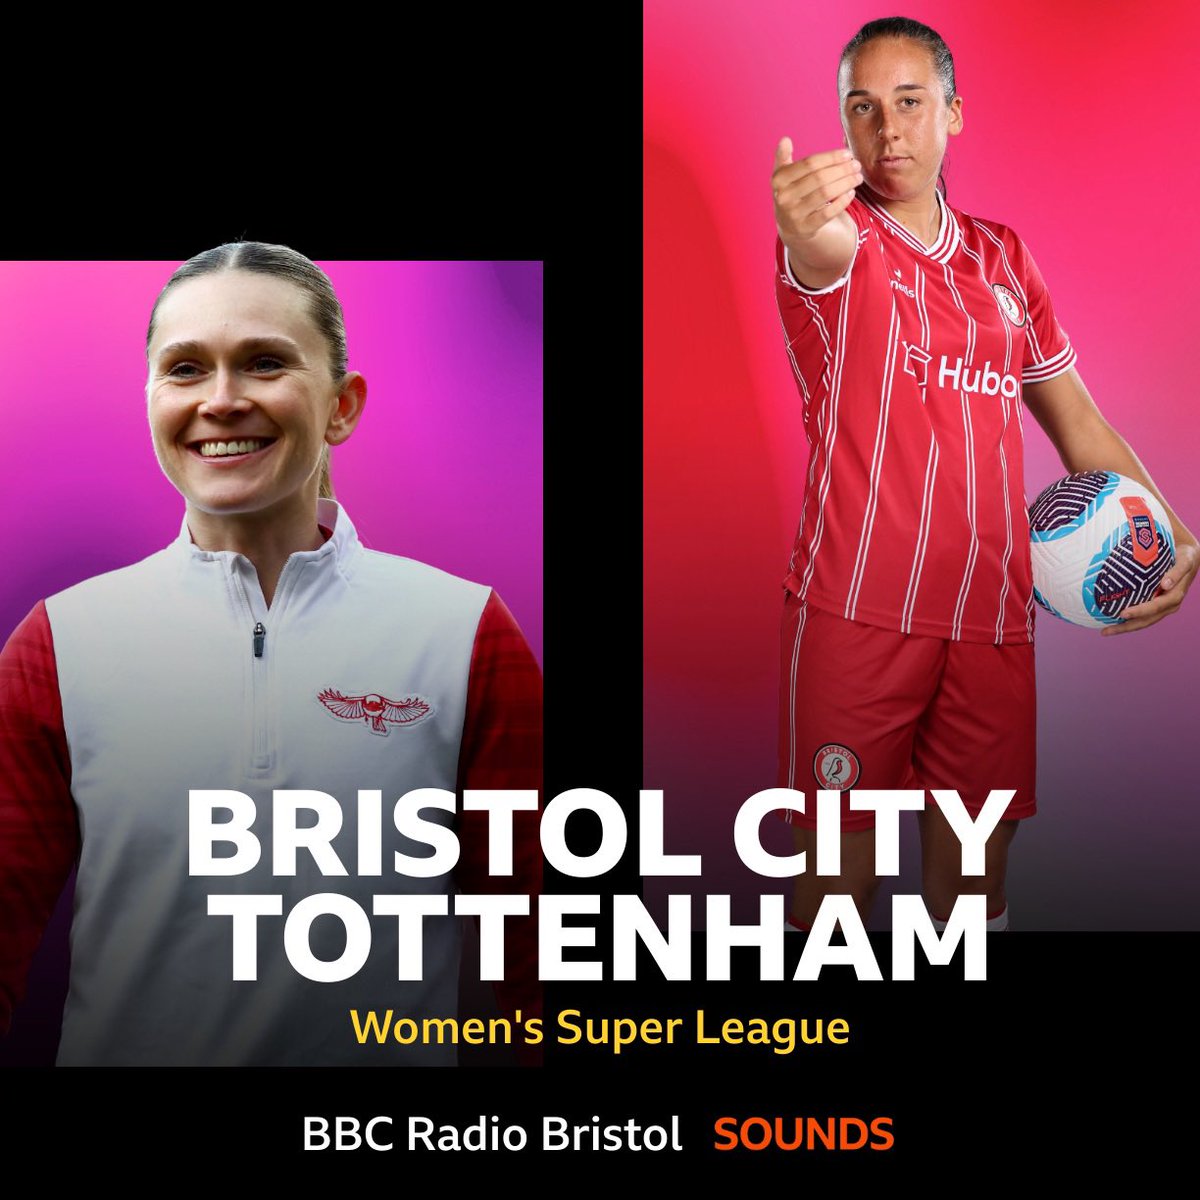 ⚽️ Bristol City Women 🆚 Tottenham Hotspur Women 🎙️ Build up & commentary from 1.30pm with @RoscoHeaton & Frankie Brown 📻 @BBCRB 94.9FM, DAB 💻📱@BBCSounds 📺 Freeview 719